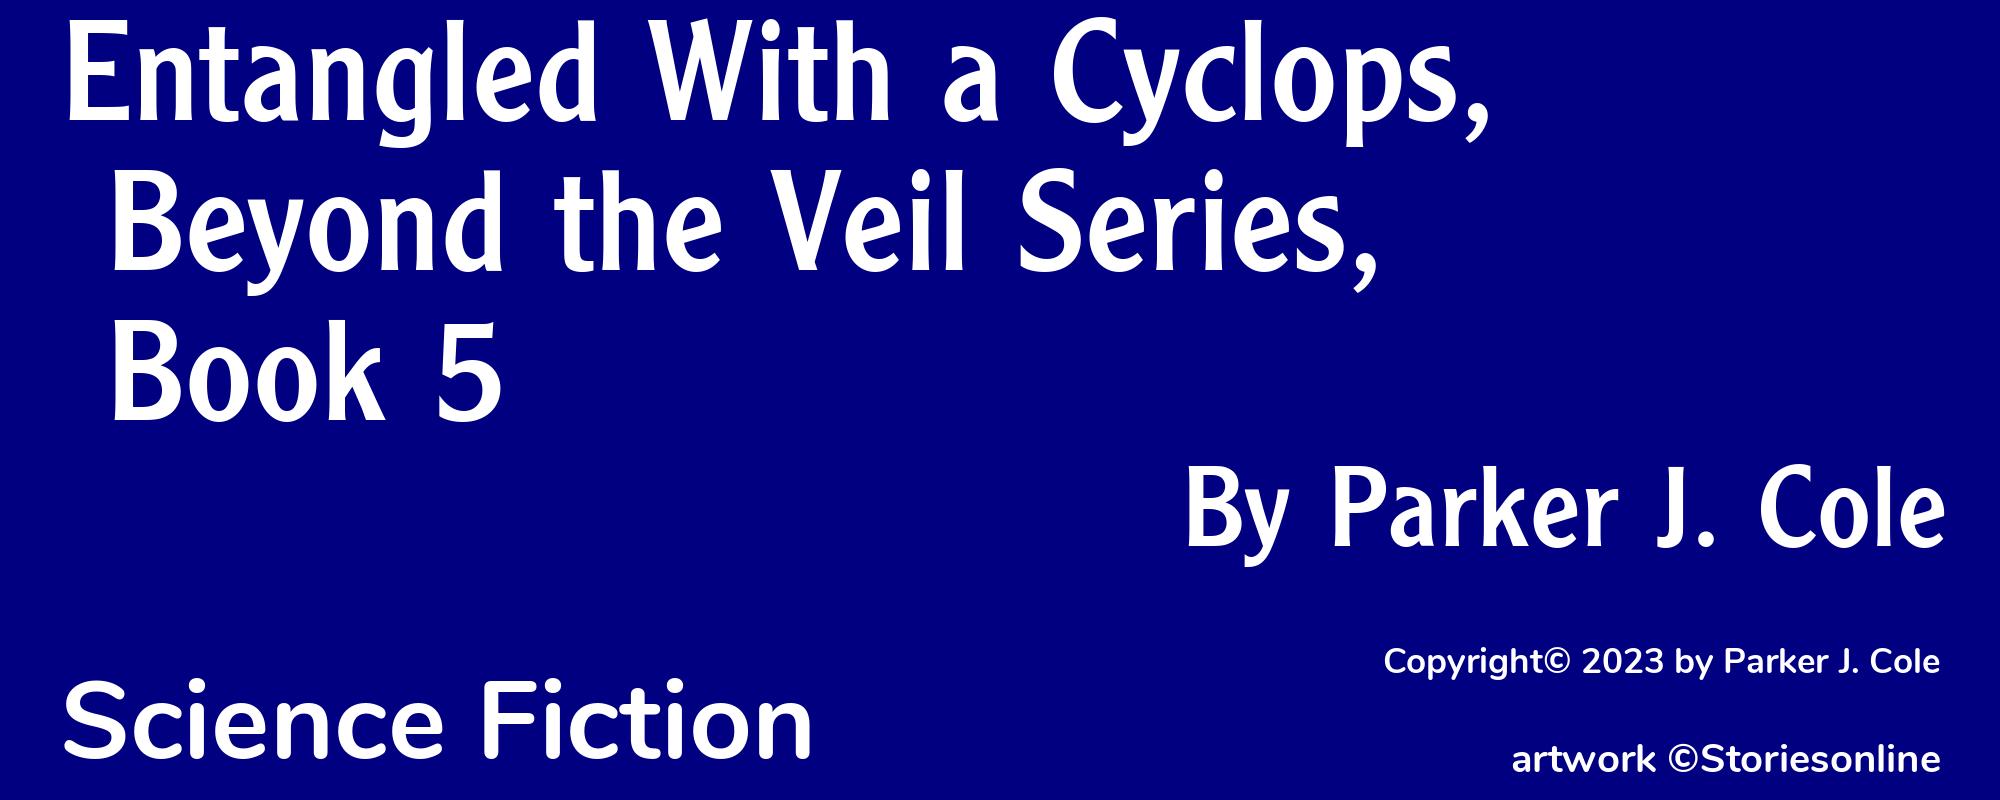 Entangled With a Cyclops, Beyond the Veil Series, Book 5 - Cover